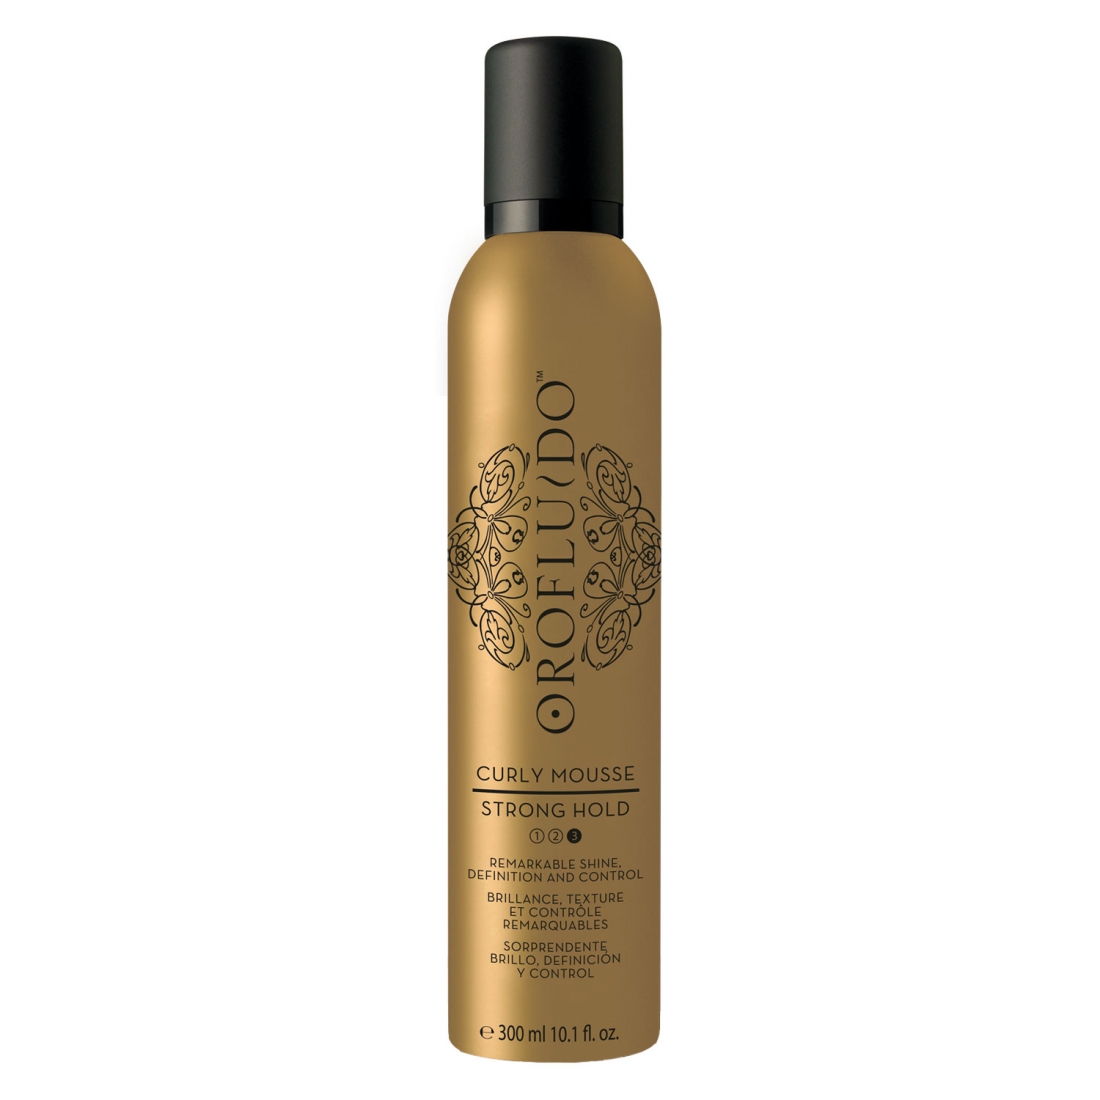 'Strong Hold Curly' Mousse - 300 ml